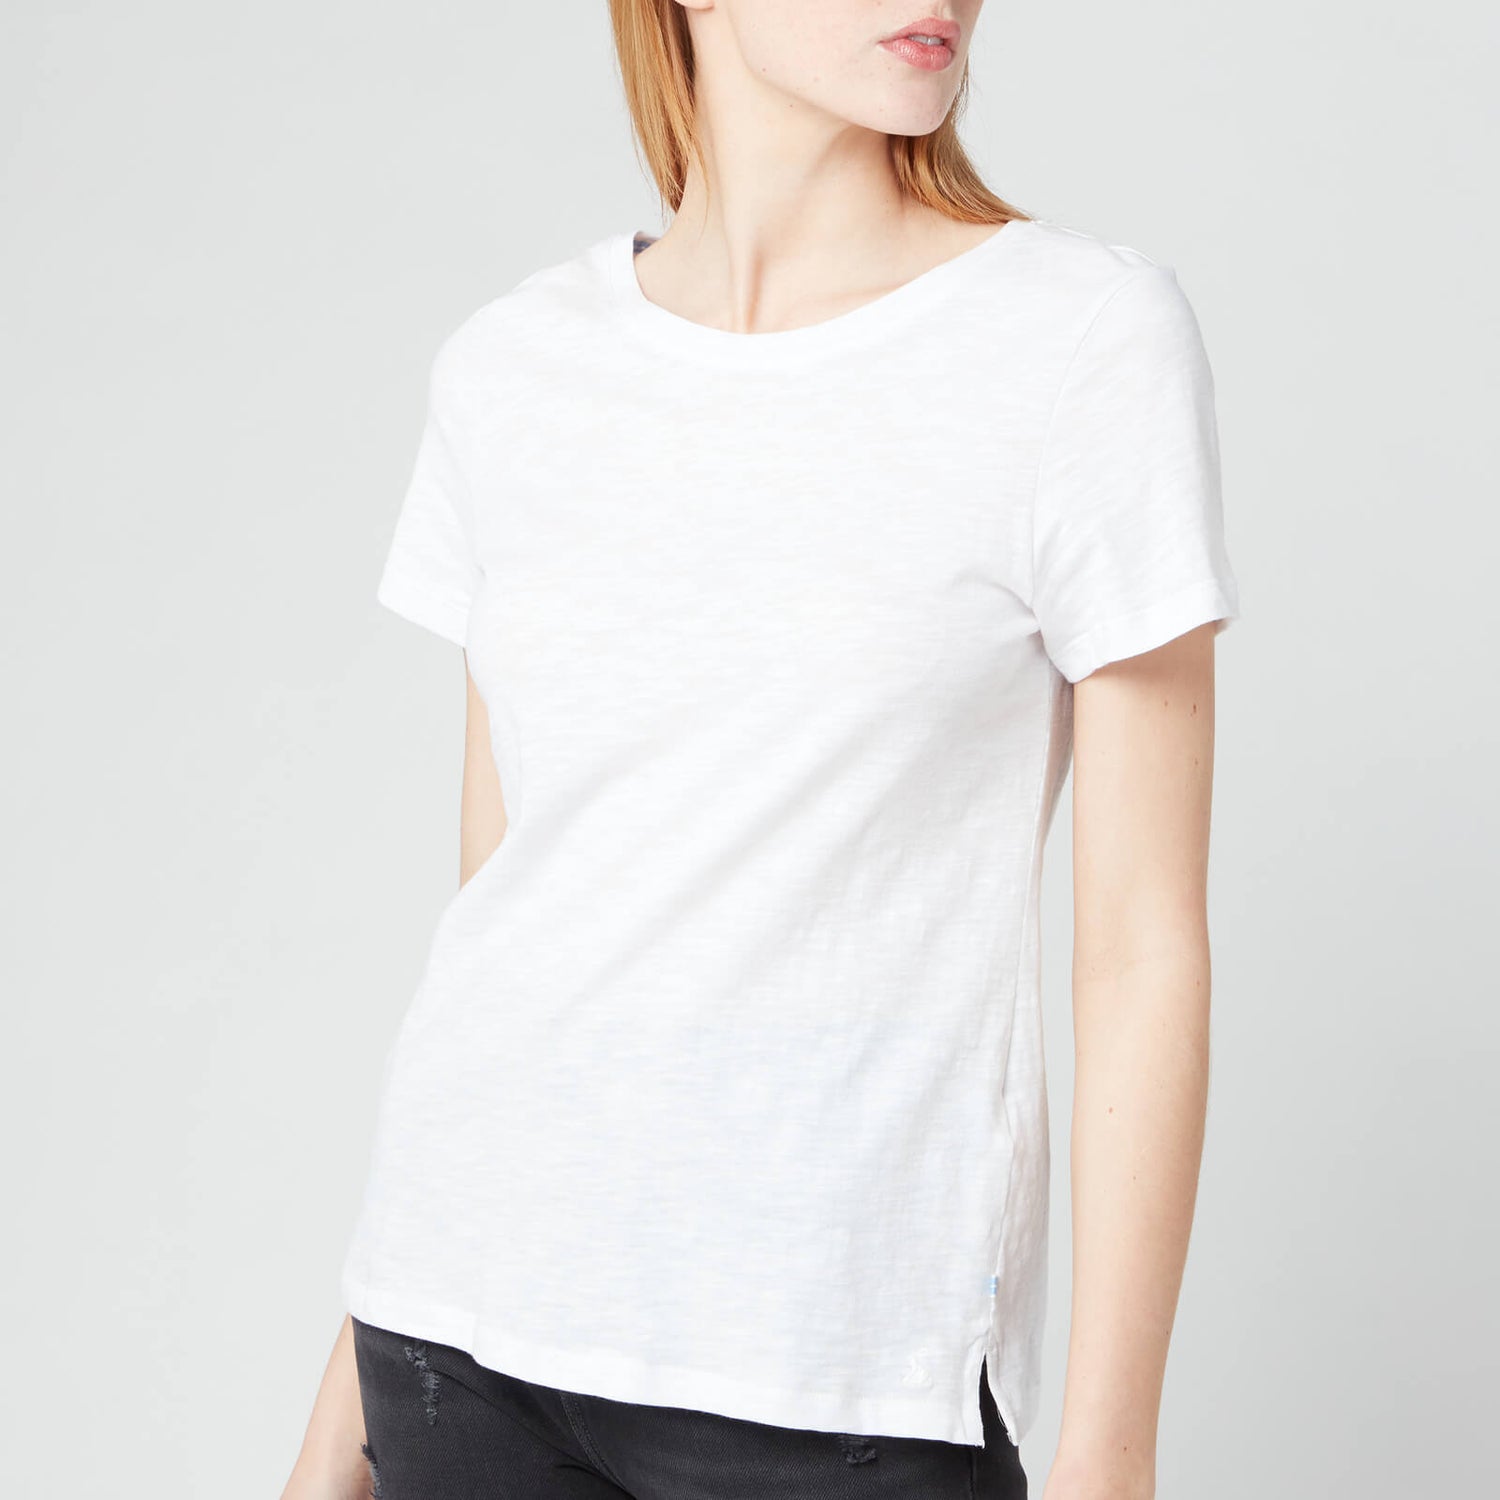 Joules Women's Carley Solid T-Shirt - Bright White